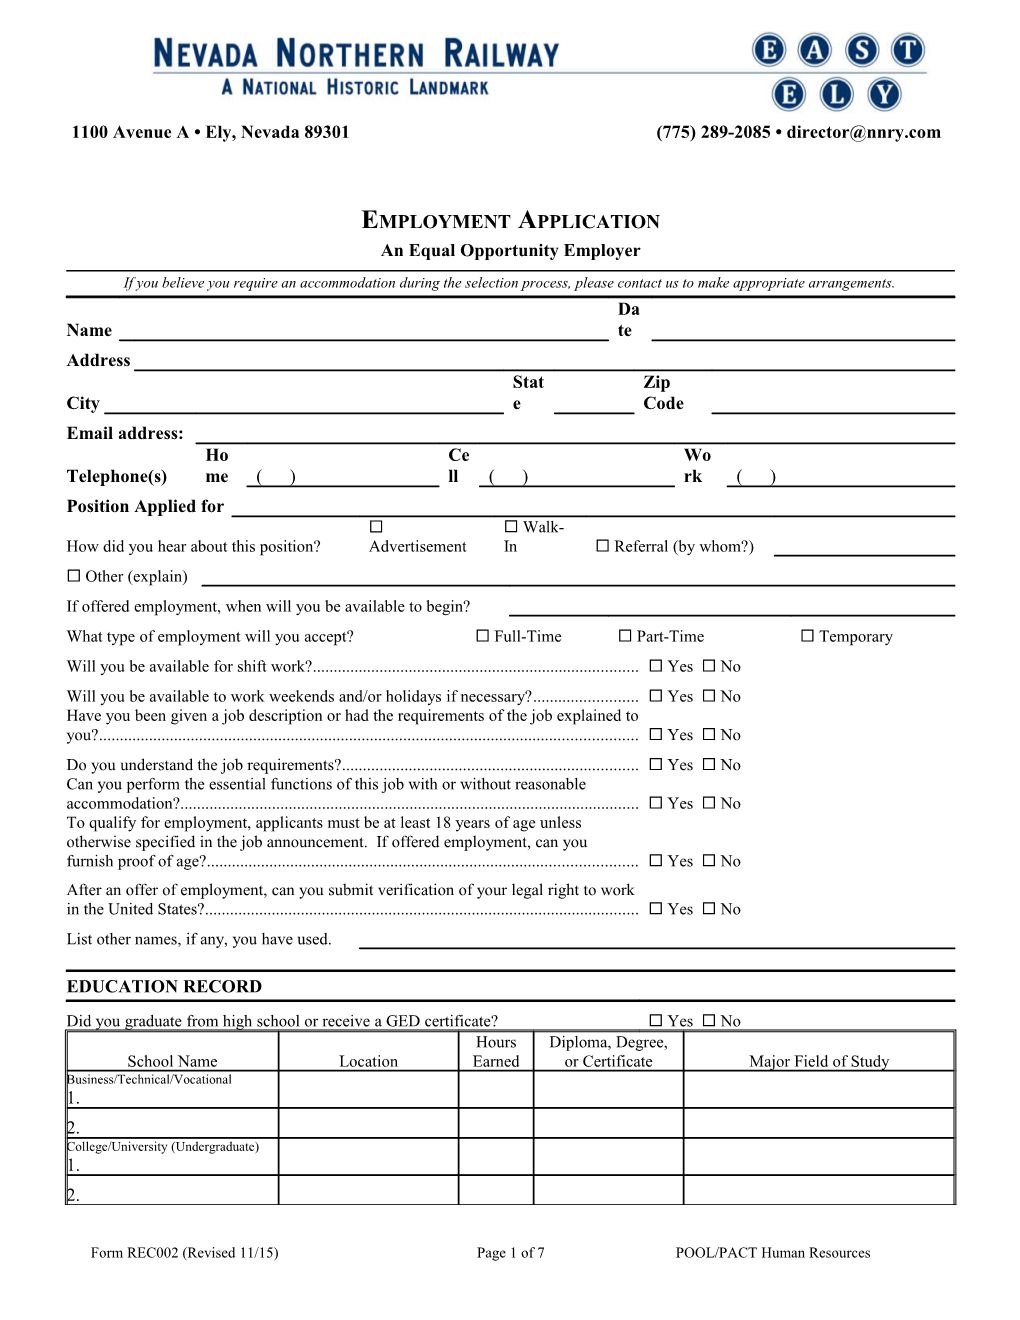 Form REC002 (Revised 11/15)Page 1 of 6POOL/PACT Human Resources